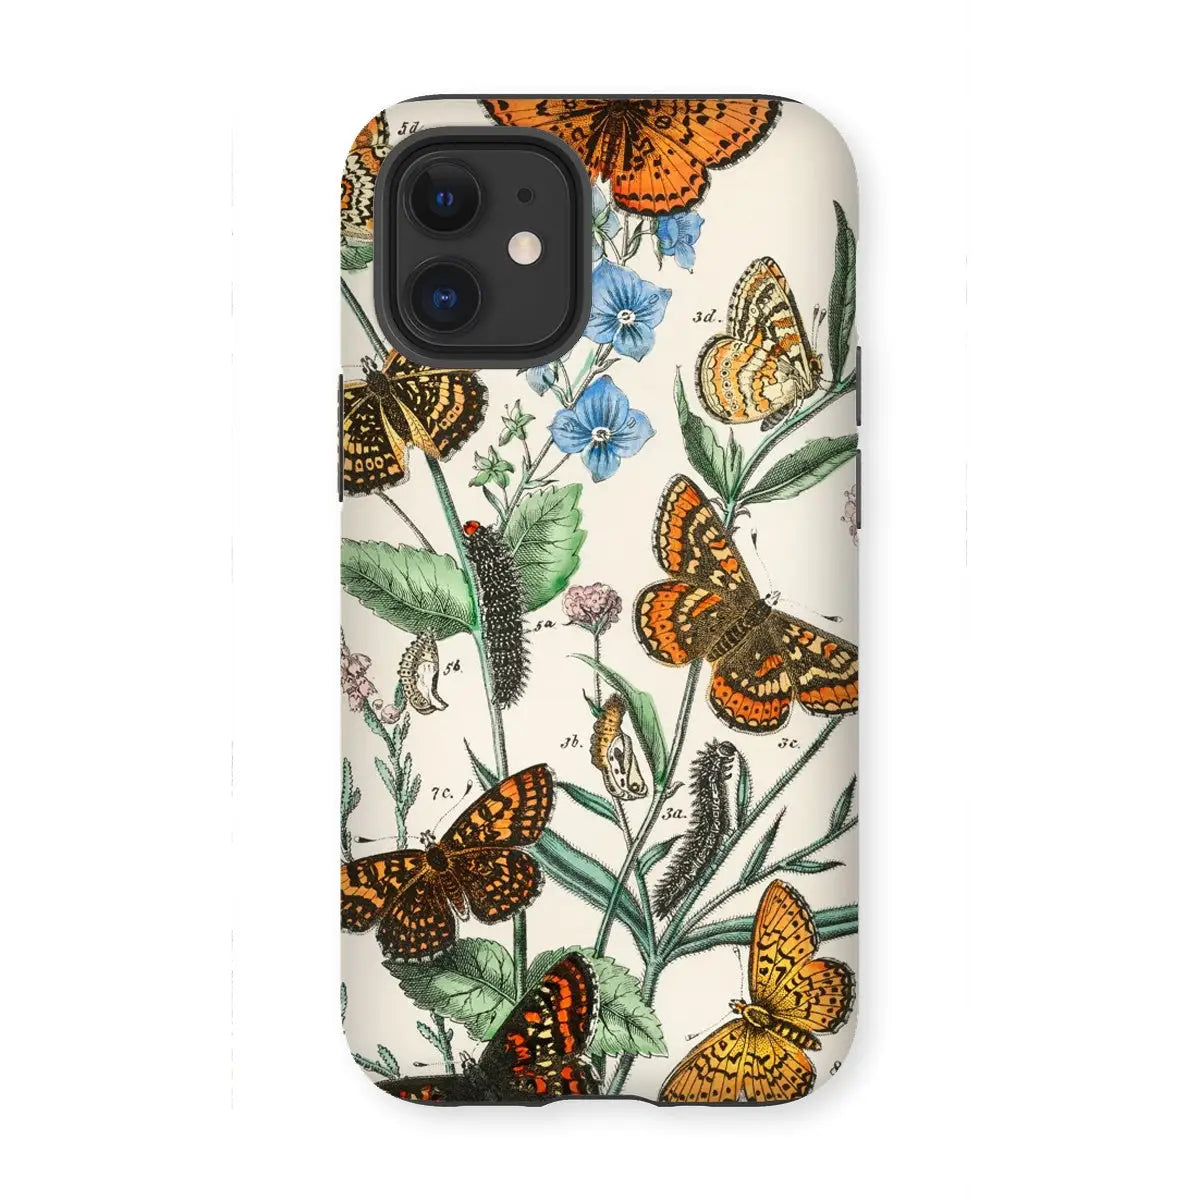 European Butterflies And Moths 2 Art Phone Case - William Forsell Kirby - Iphone 12 Mini / Matte - Mobile Phone Cases